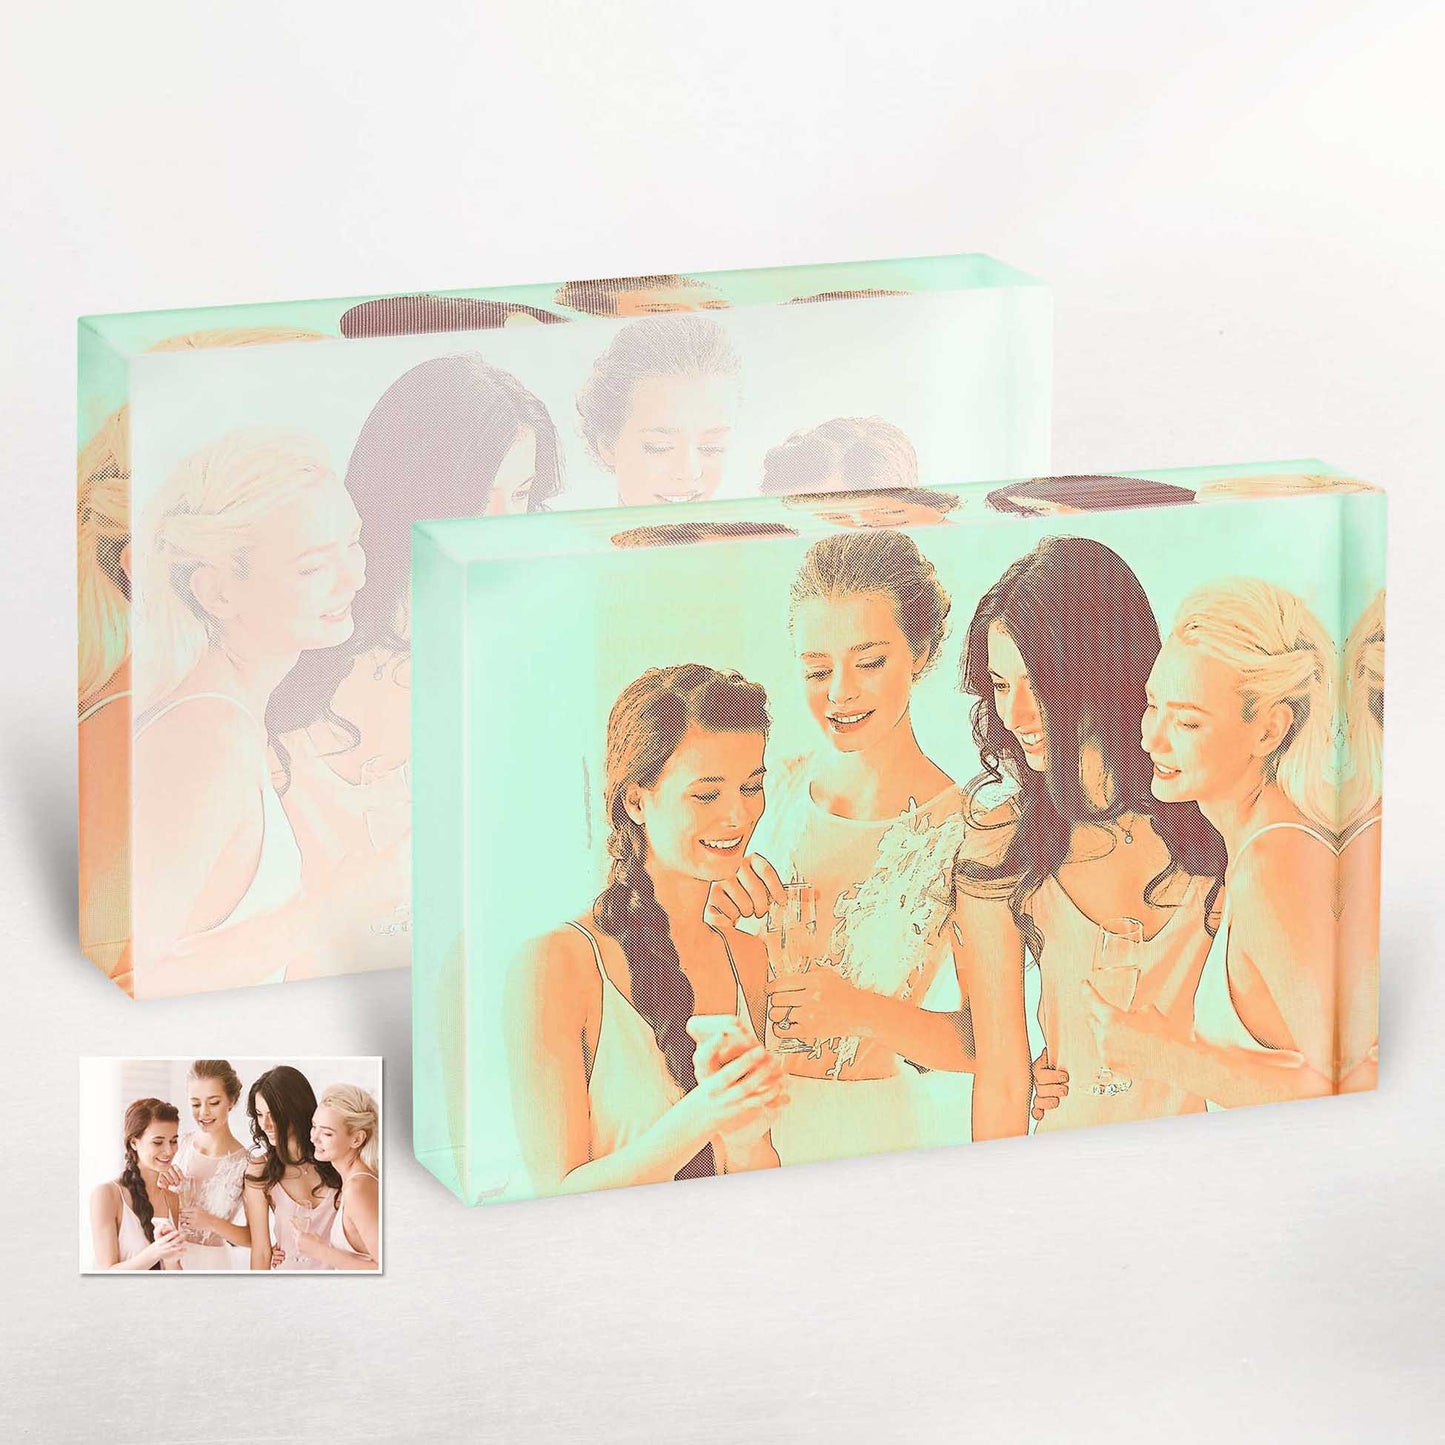 Transform your space into a lively and dynamic environment with our Personalised Orange and Green Tones Acrylic Block Photo. Its exciting and cool appearance, inspired by a fun and fresh natural look